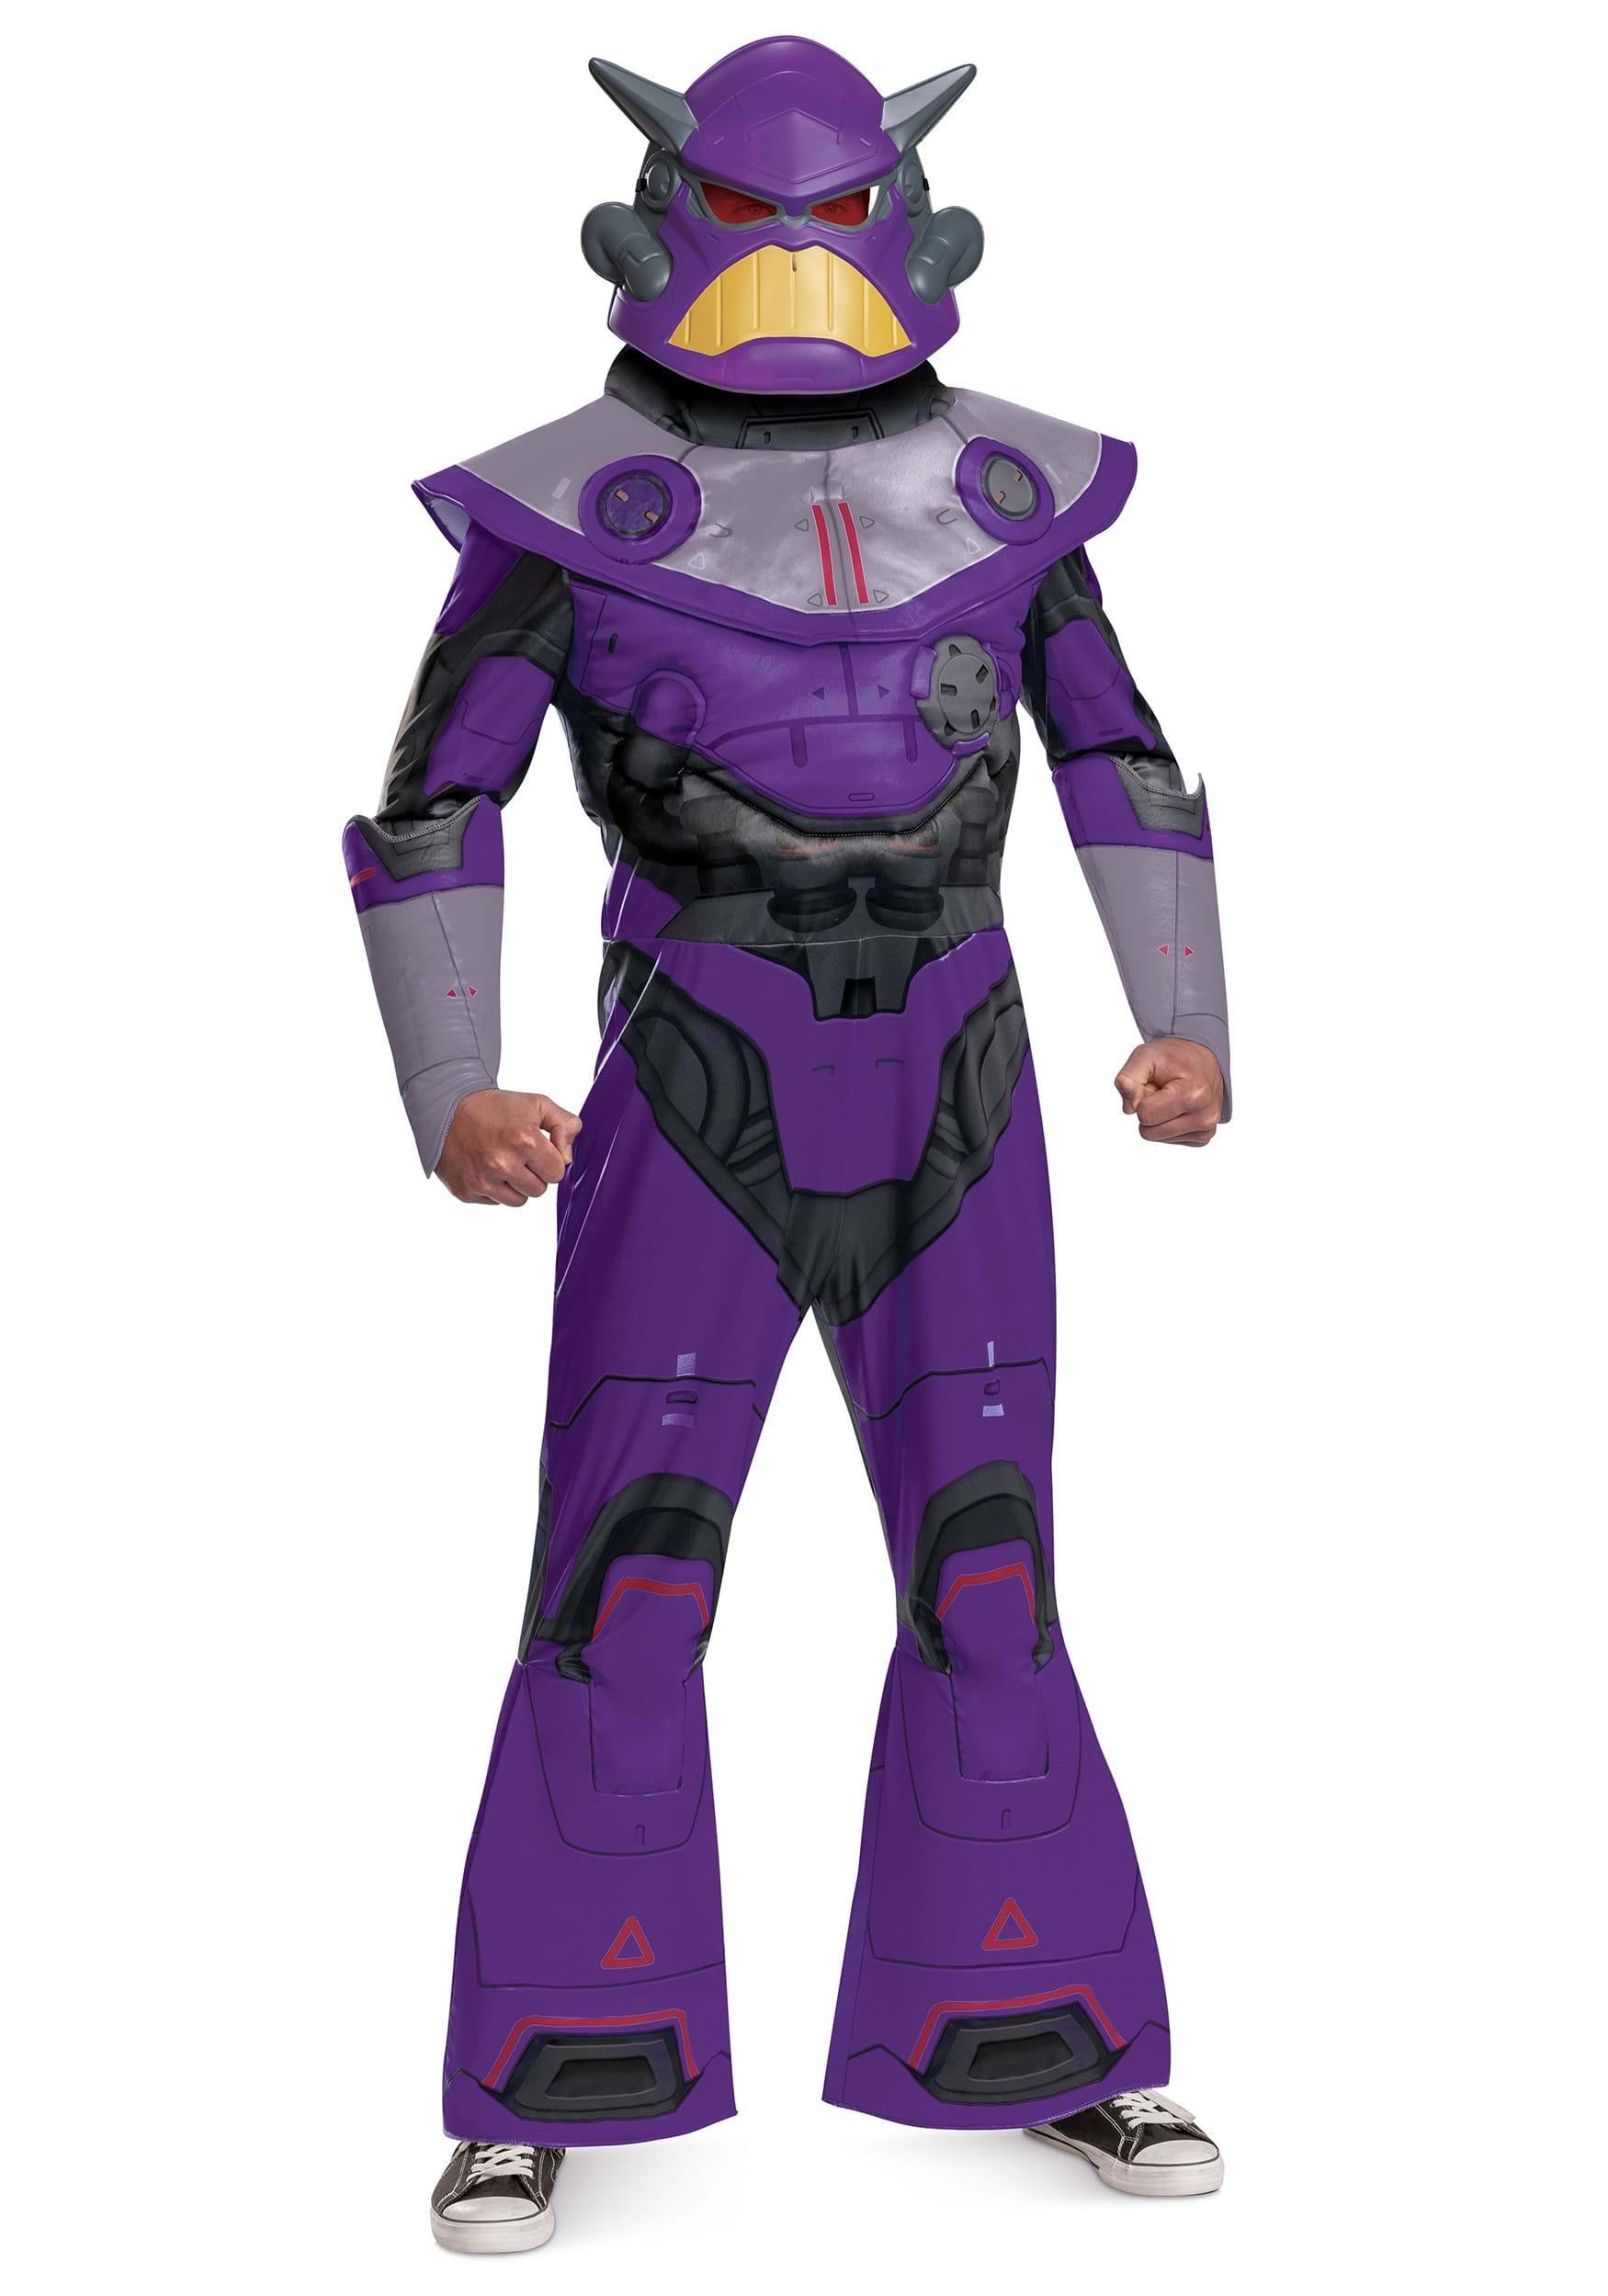 Image of Lightyear Zurg Deluxe Adult Costume ID DI125109-XL